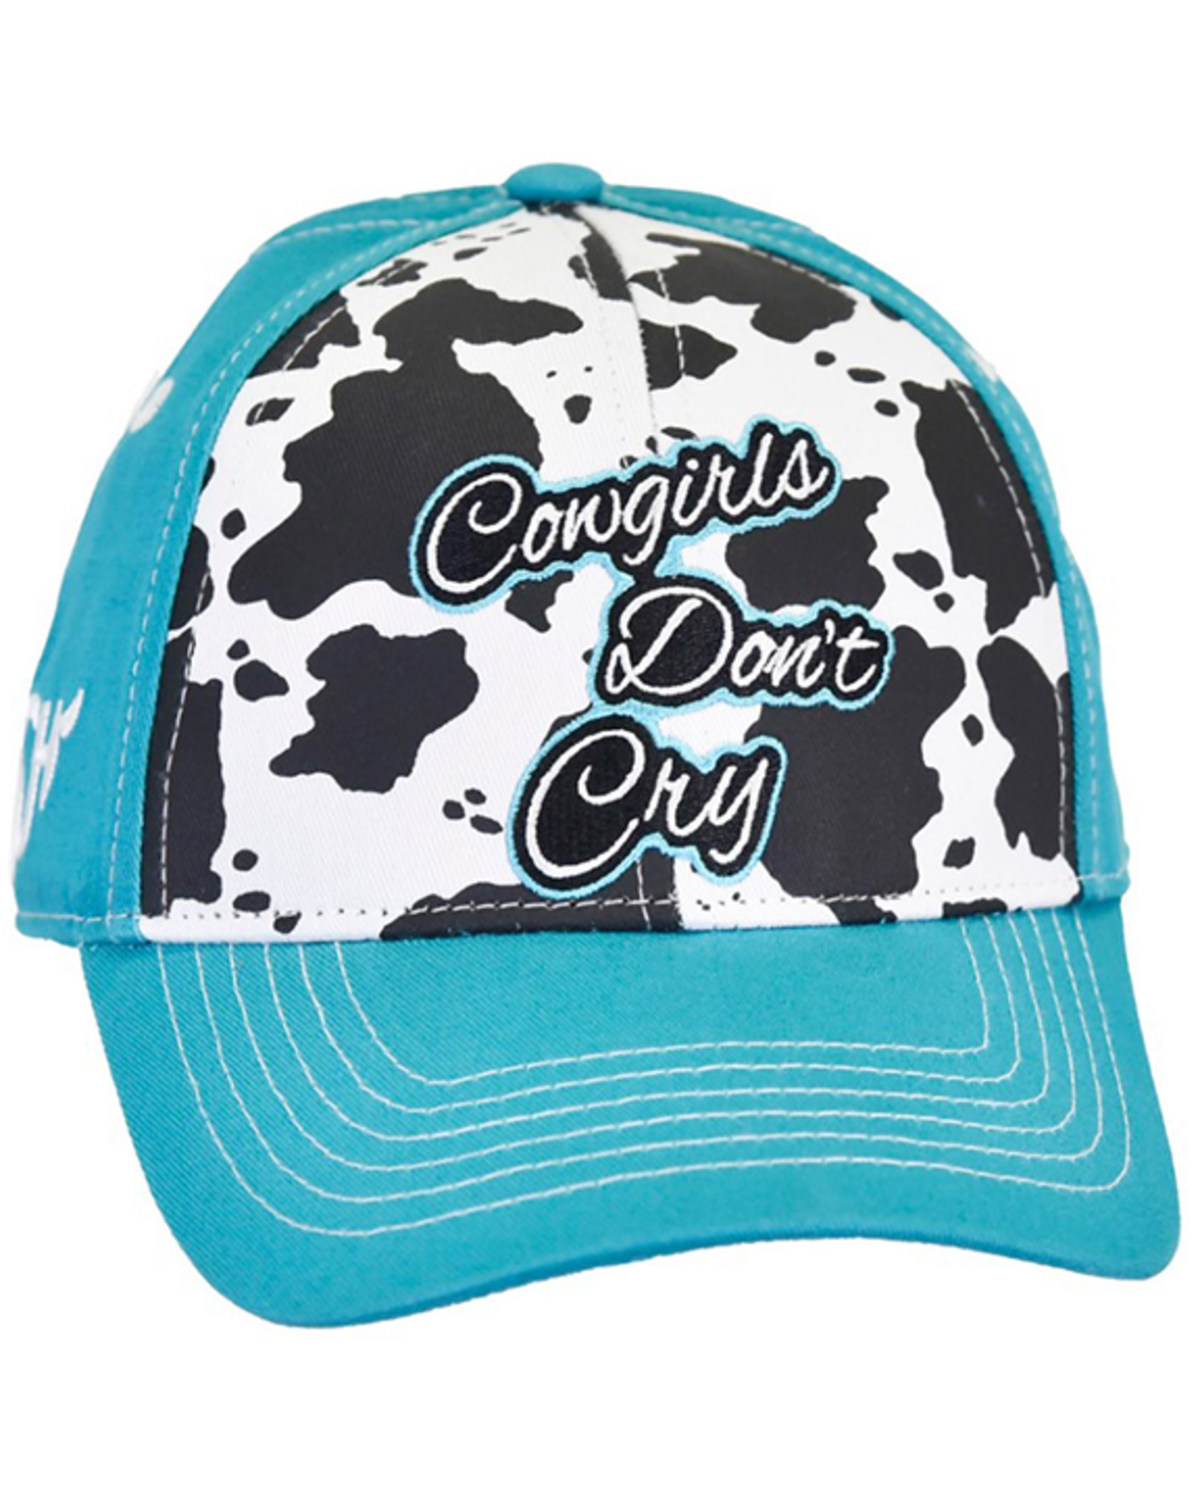 Cowgirl Hardware Girls' Cowgirls Don't Cry Baseball Cap